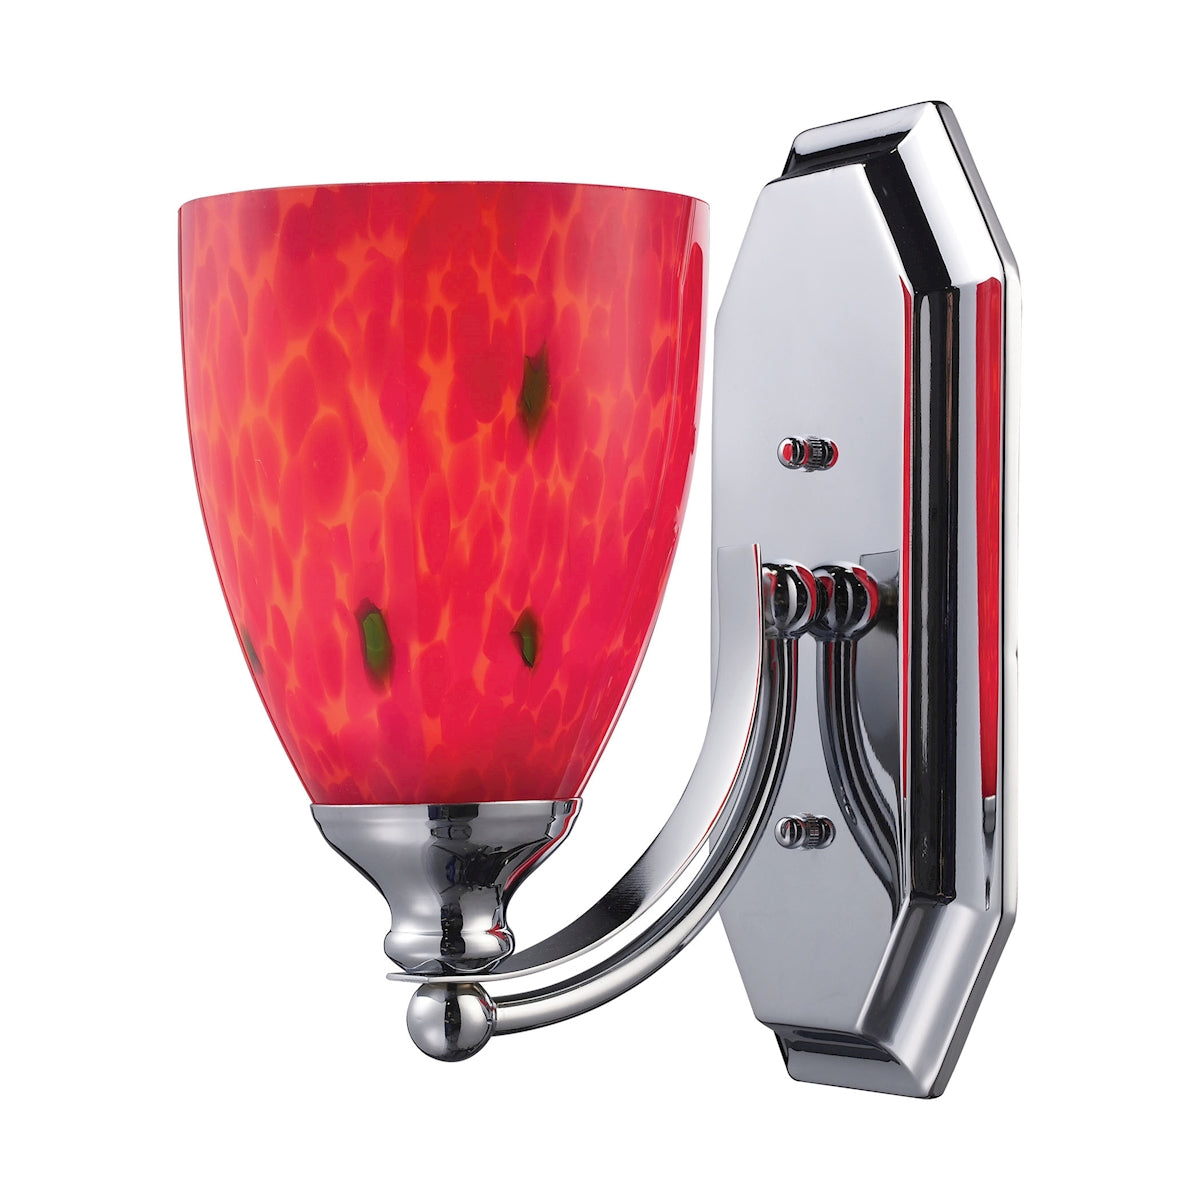 ELK Lighting 570-1C-FR Mix and Match Vanity 1-Light Wall Lamp in Chrome with Fire Red Glass